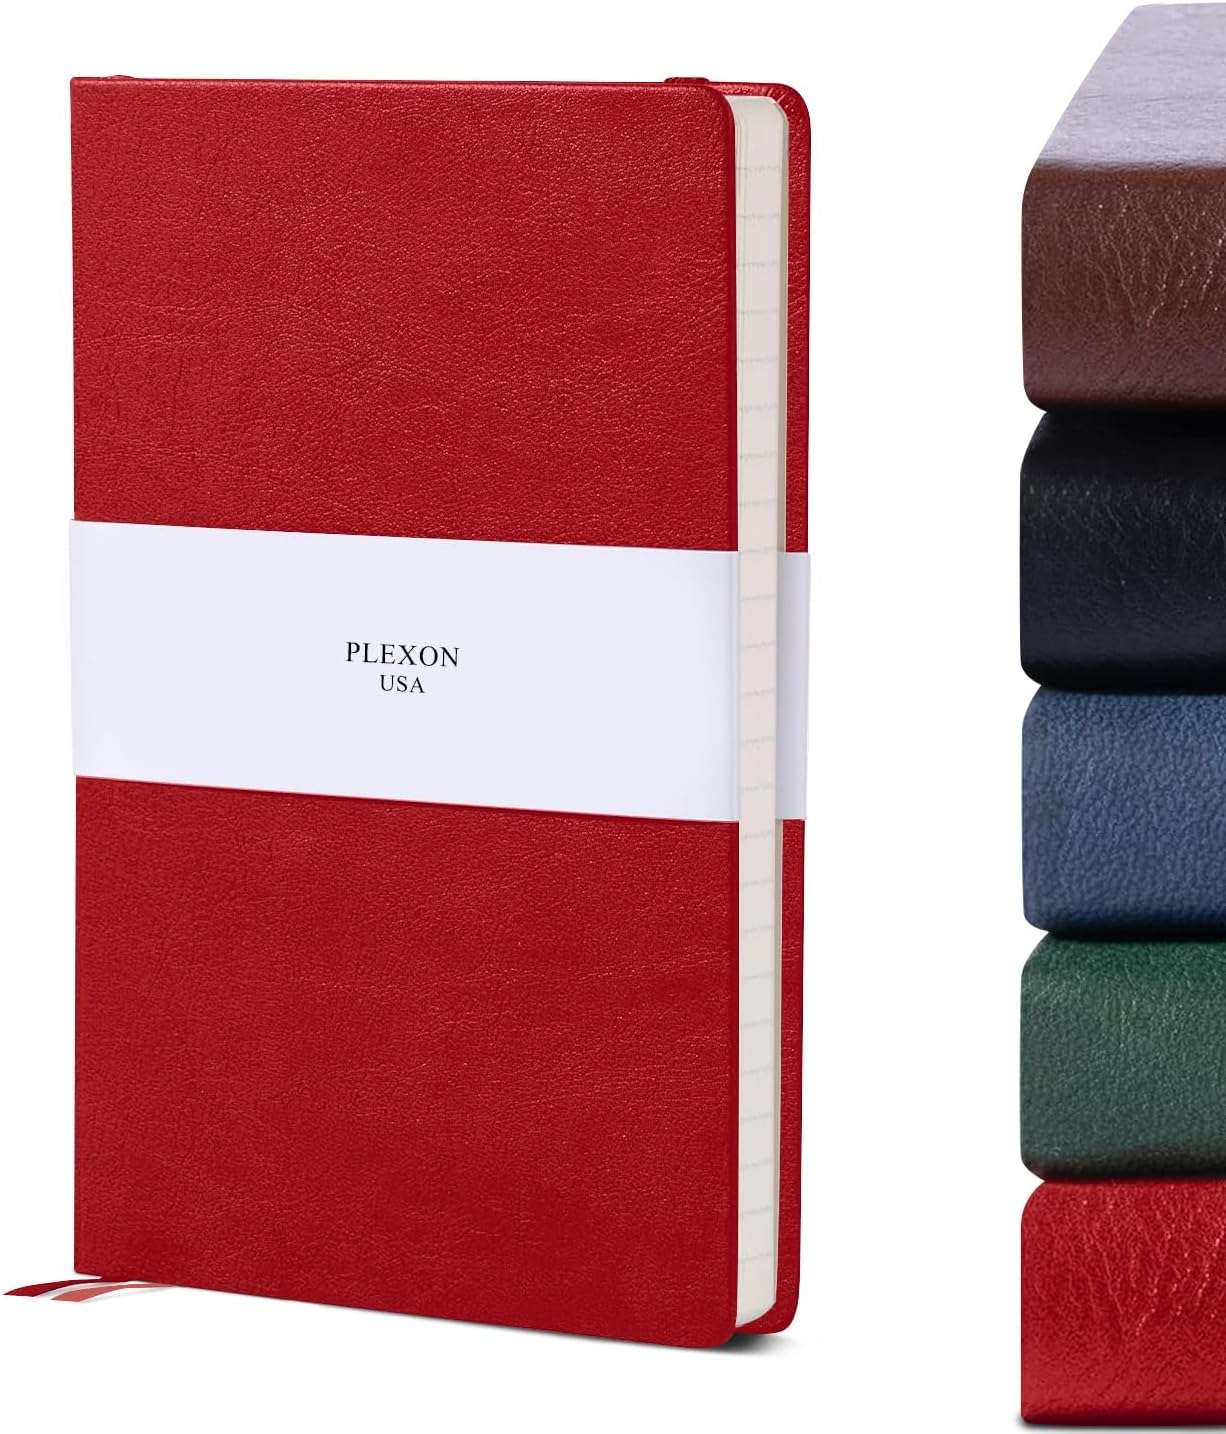 Red A5 Hardcover Vegan Leather Ruled Notebook with 120 gsm Lined Cream Paper and Gift Box, 80 Sheets - 1